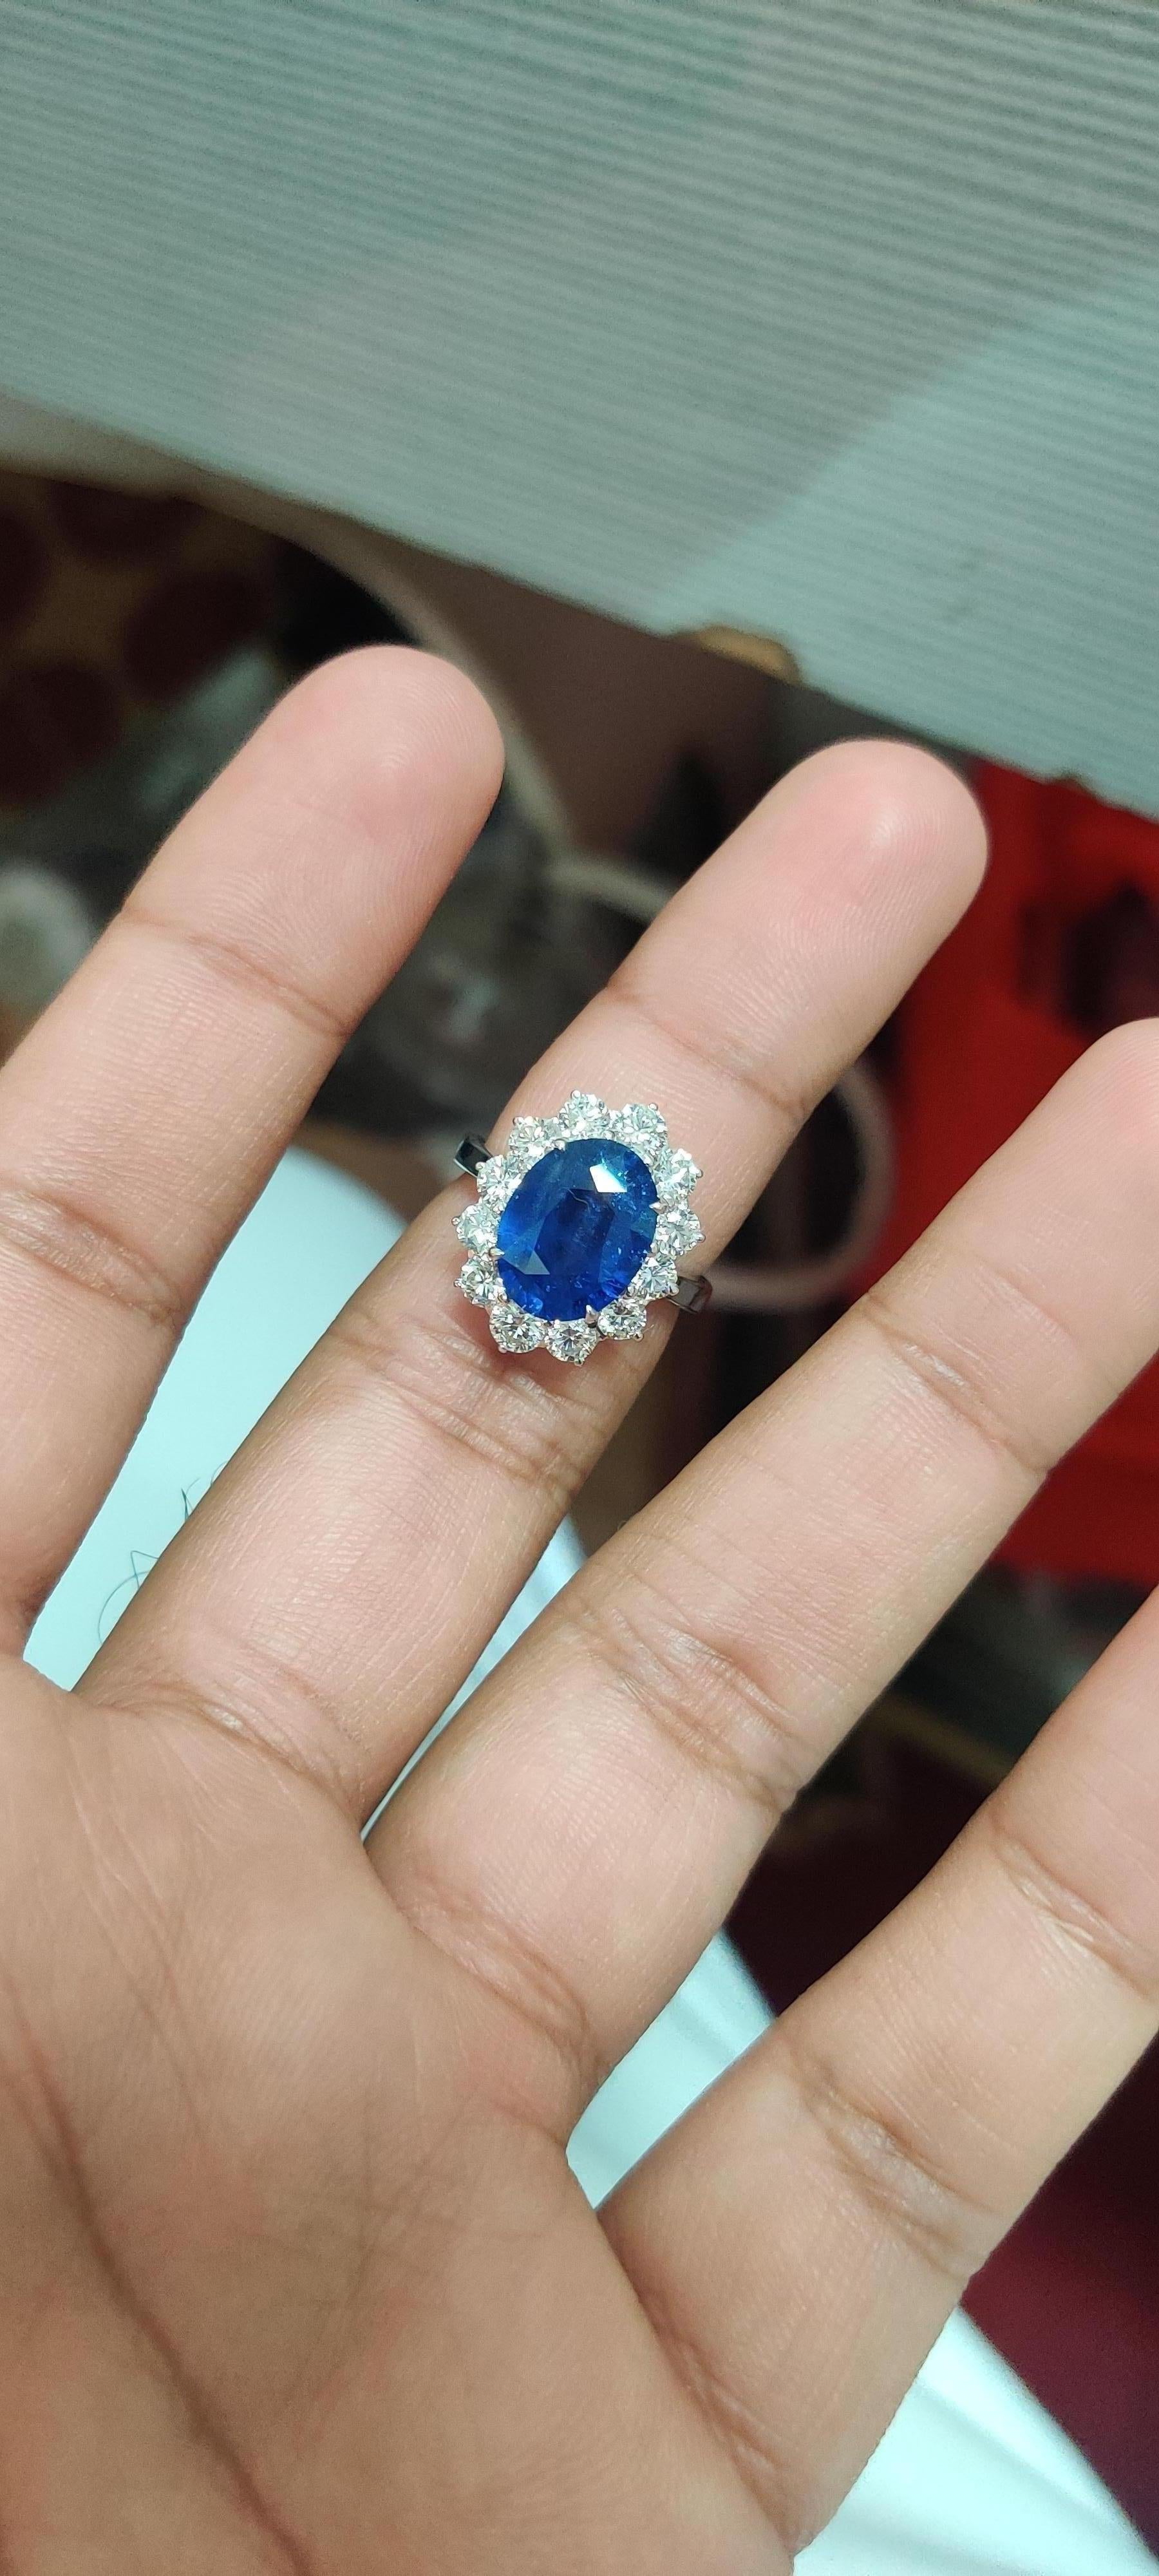 Introducing our exquisite 4.56 Carat Oval Sapphire Ring, a regal masterpiece of timeless beauty and elegance. This captivating piece features a stunning 4.56 carat oval sapphire, sourced from Sri Lanka, boasting a rich royal blue hue that evokes